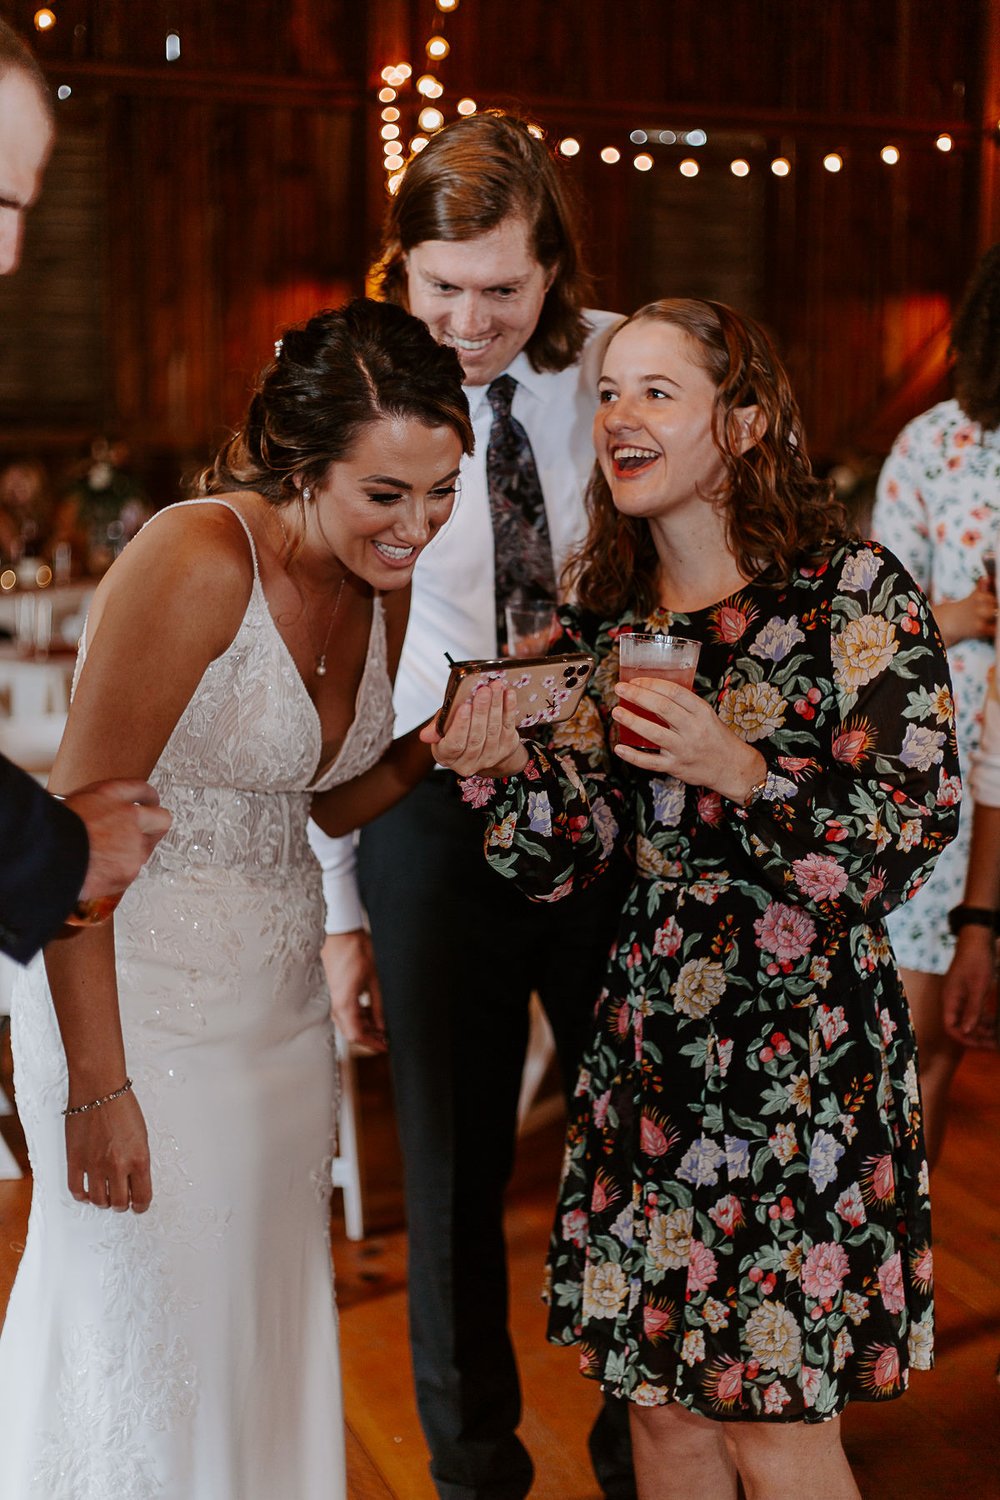 Bride laughs looking at guest's phone at wedding reception